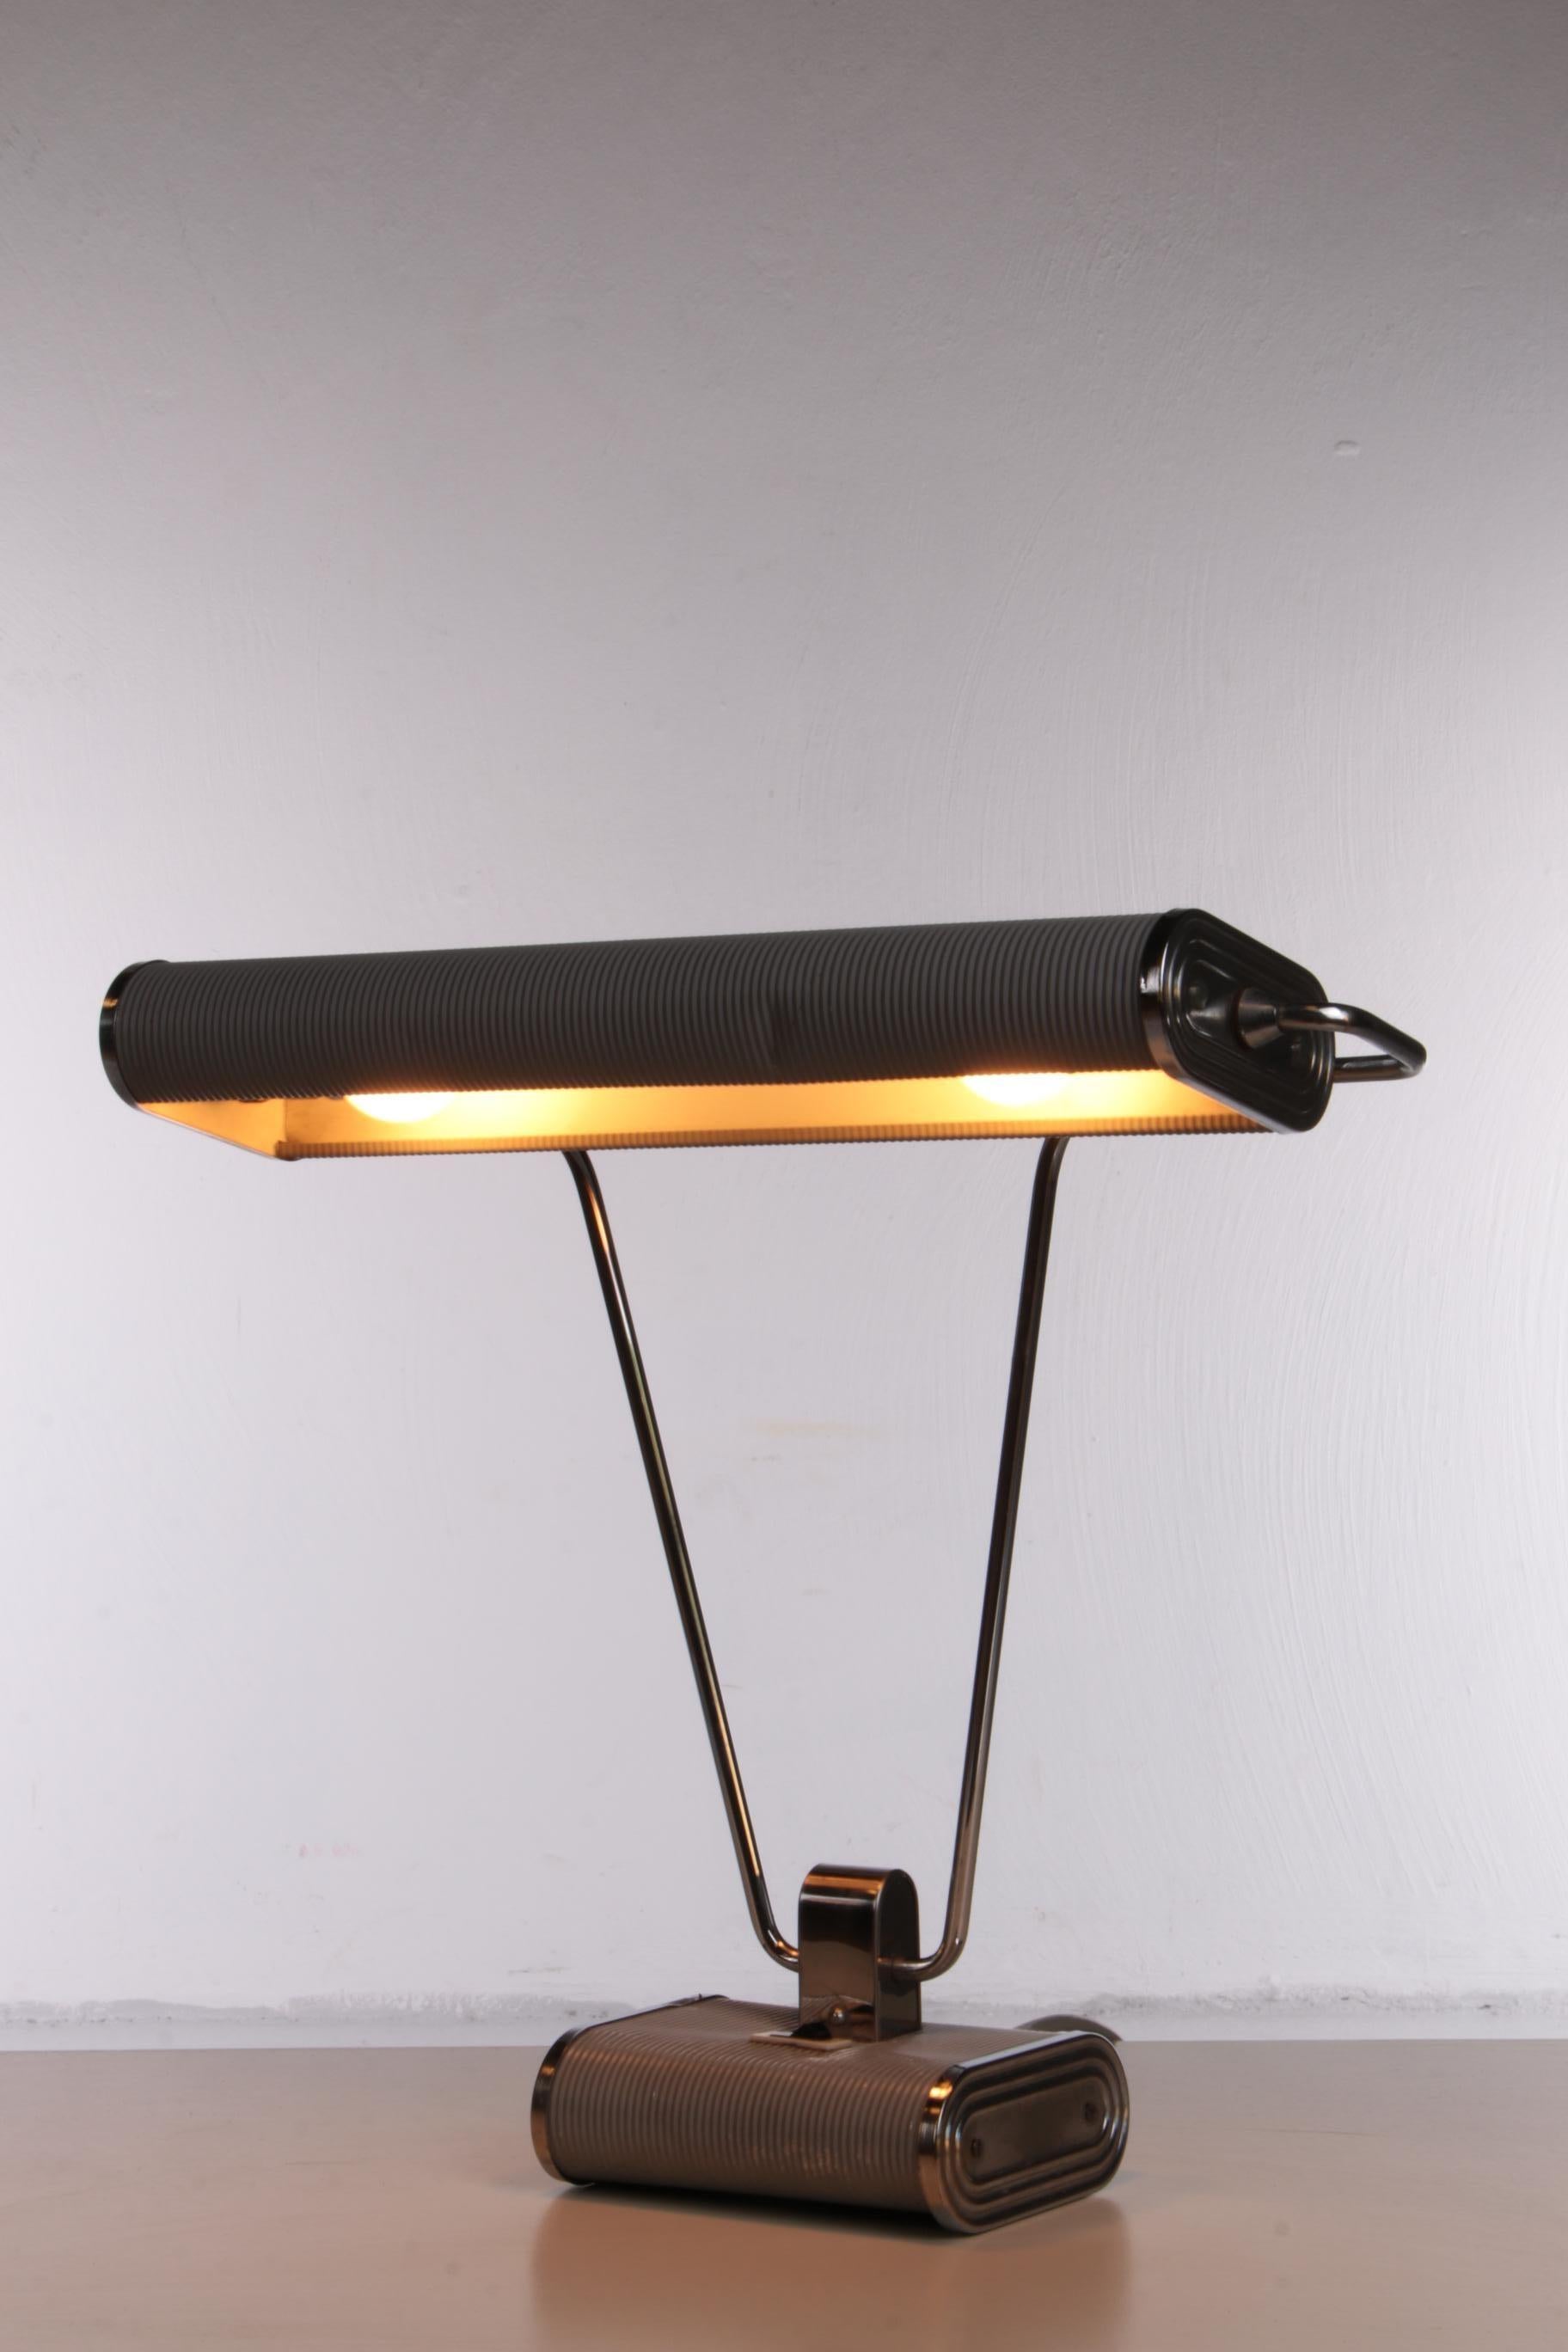 French Art Deco Eileen Gray Desk Lamp Made by Jumo, 1930s